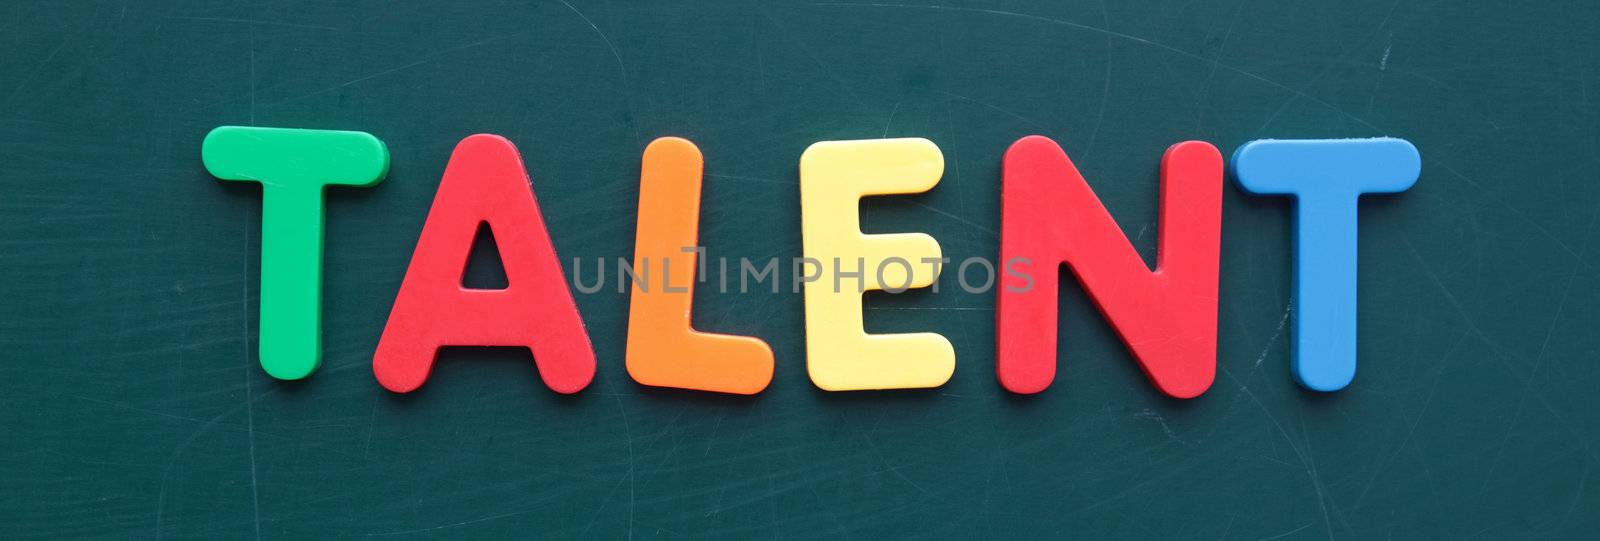 The term for talent in colorful letters on a blackboard.